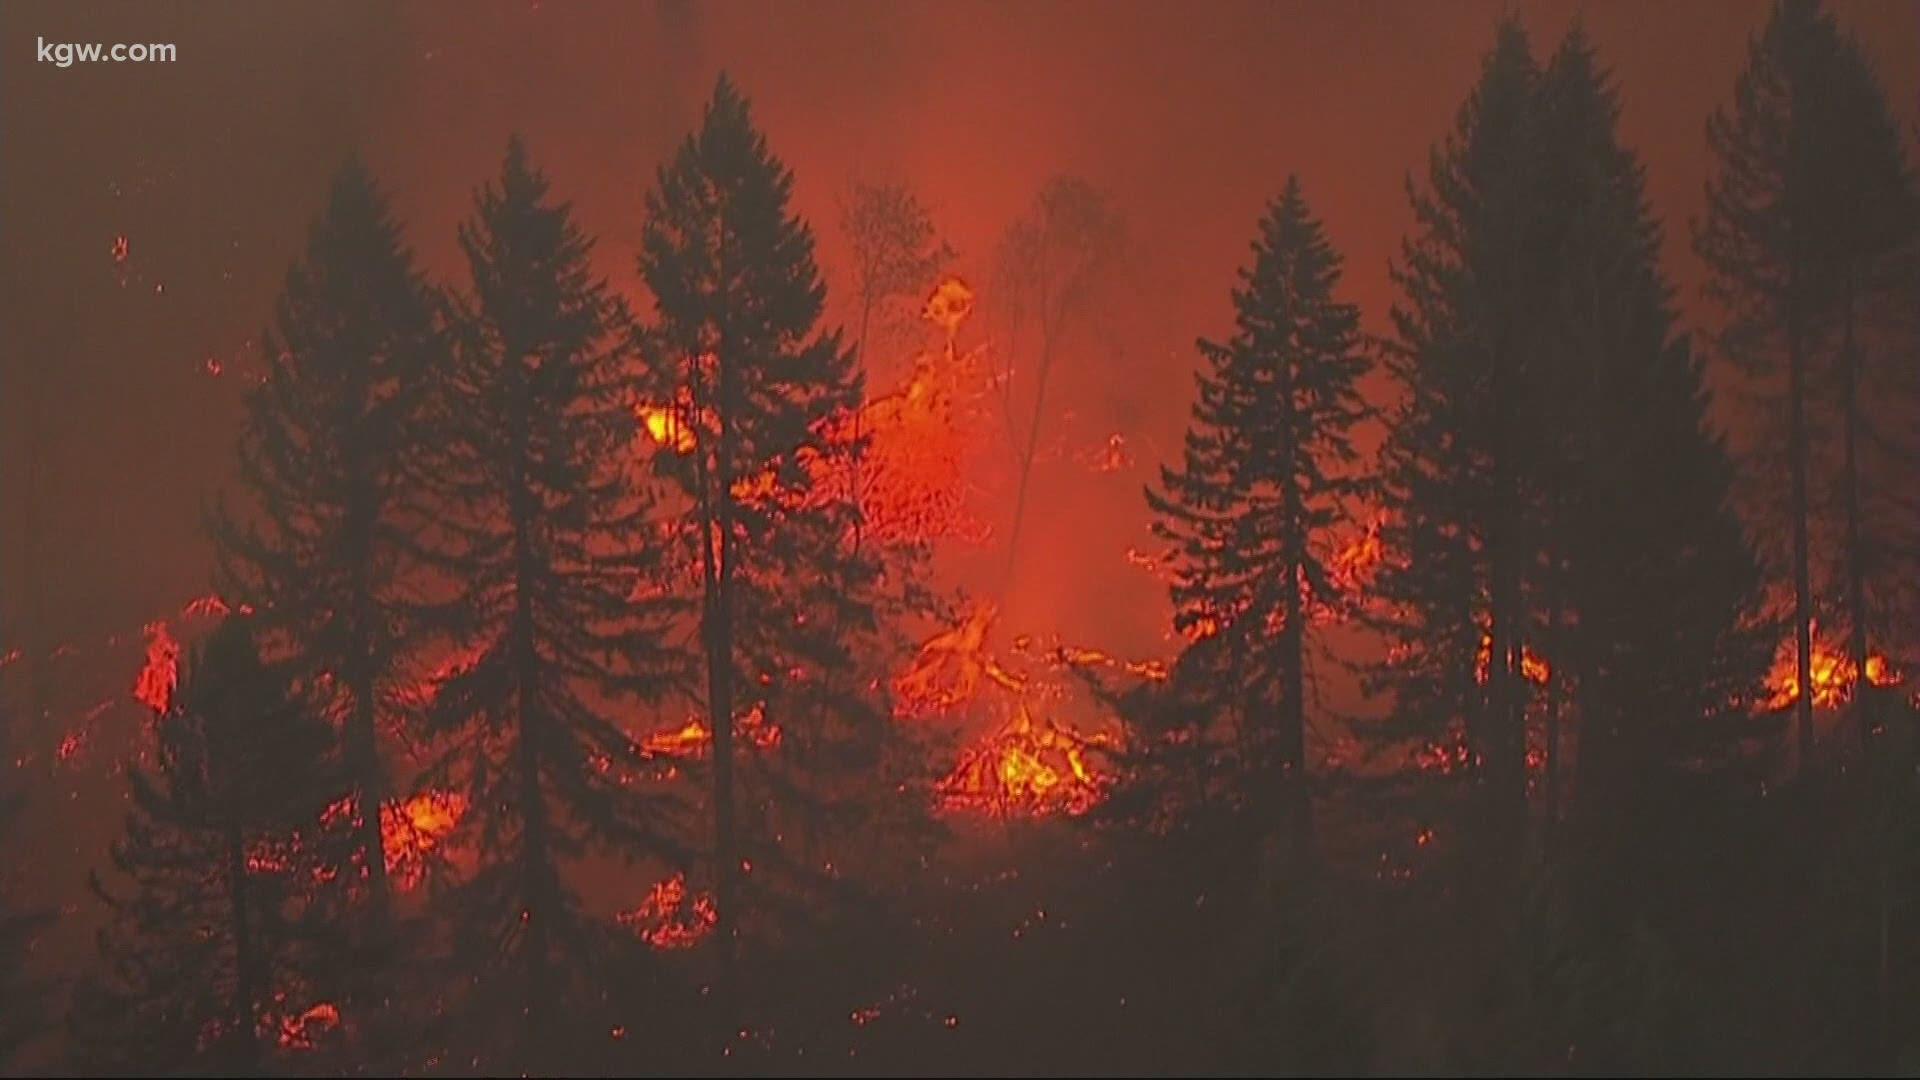 As the rainy season comes in, the Oregon wildfire season is coming to an end.